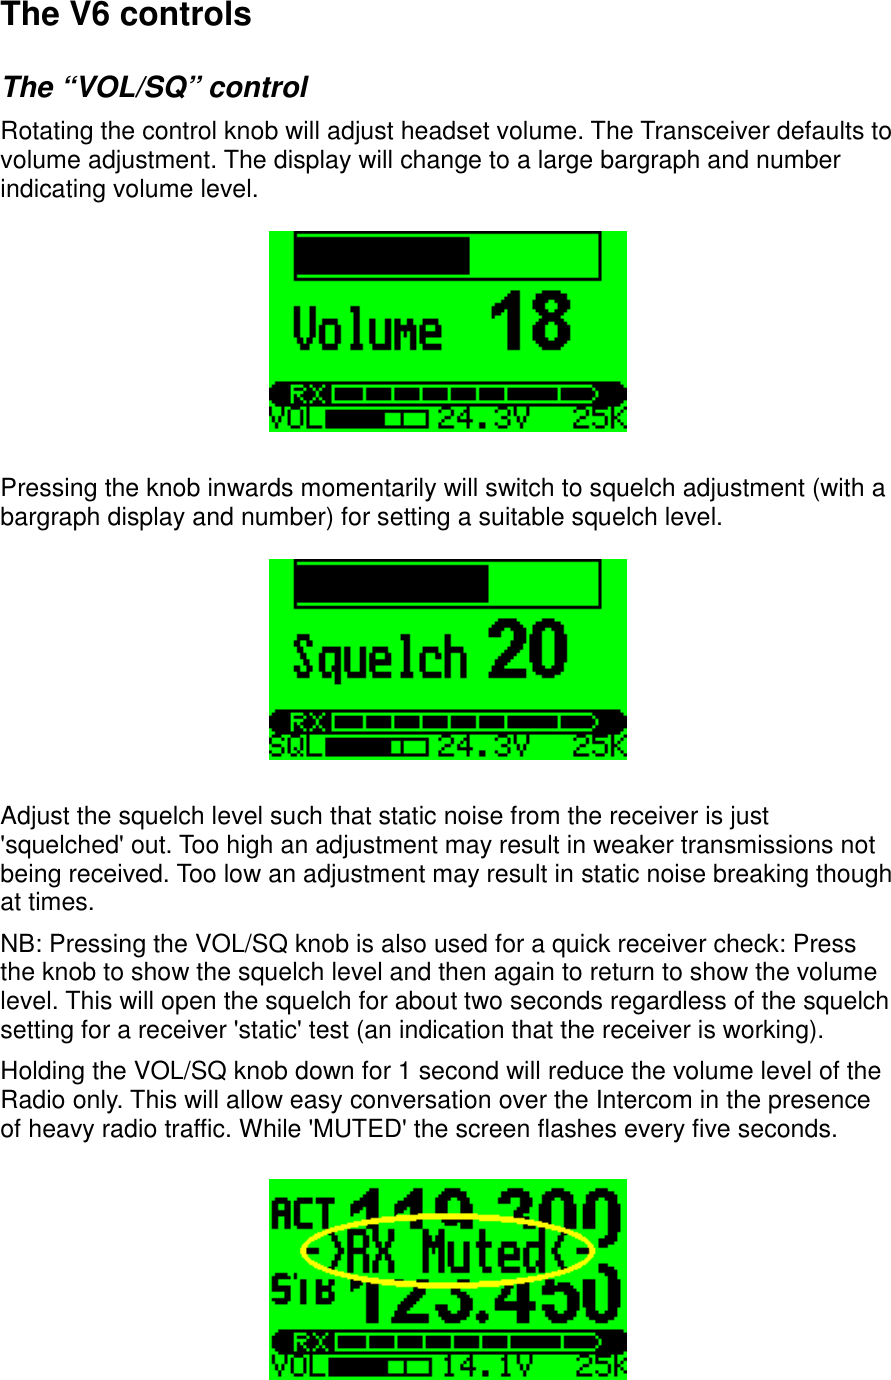 The V6 controlsThe “VOL/SQ” controlRotating the control knob will adjust headset volume. The Transceiver defaults to volume adjustment. The display will change to a large bargraph and number indicating volume level.Pressing the knob inwards momentarily will switch to squelch adjustment (with a bargraph display and number) for setting a suitable squelch level.Adjust the squelch level such that static noise from the receiver is just &apos;squelched&apos; out. Too high an adjustment may result in weaker transmissions not being received. Too low an adjustment may result in static noise breaking though at times.NB: Pressing the VOL/SQ knob is also used for a quick receiver check: Press the knob to show the squelch level and then again to return to show the volume level. This will open the squelch for about two seconds regardless of the squelch setting for a receiver &apos;static&apos; test (an indication that the receiver is working).Holding the VOL/SQ knob down for 1 second will reduce the volume level of the Radio only. This will allow easy conversation over the Intercom in the presence of heavy radio traffic. While &apos;MUTED&apos; the screen flashes every five seconds.